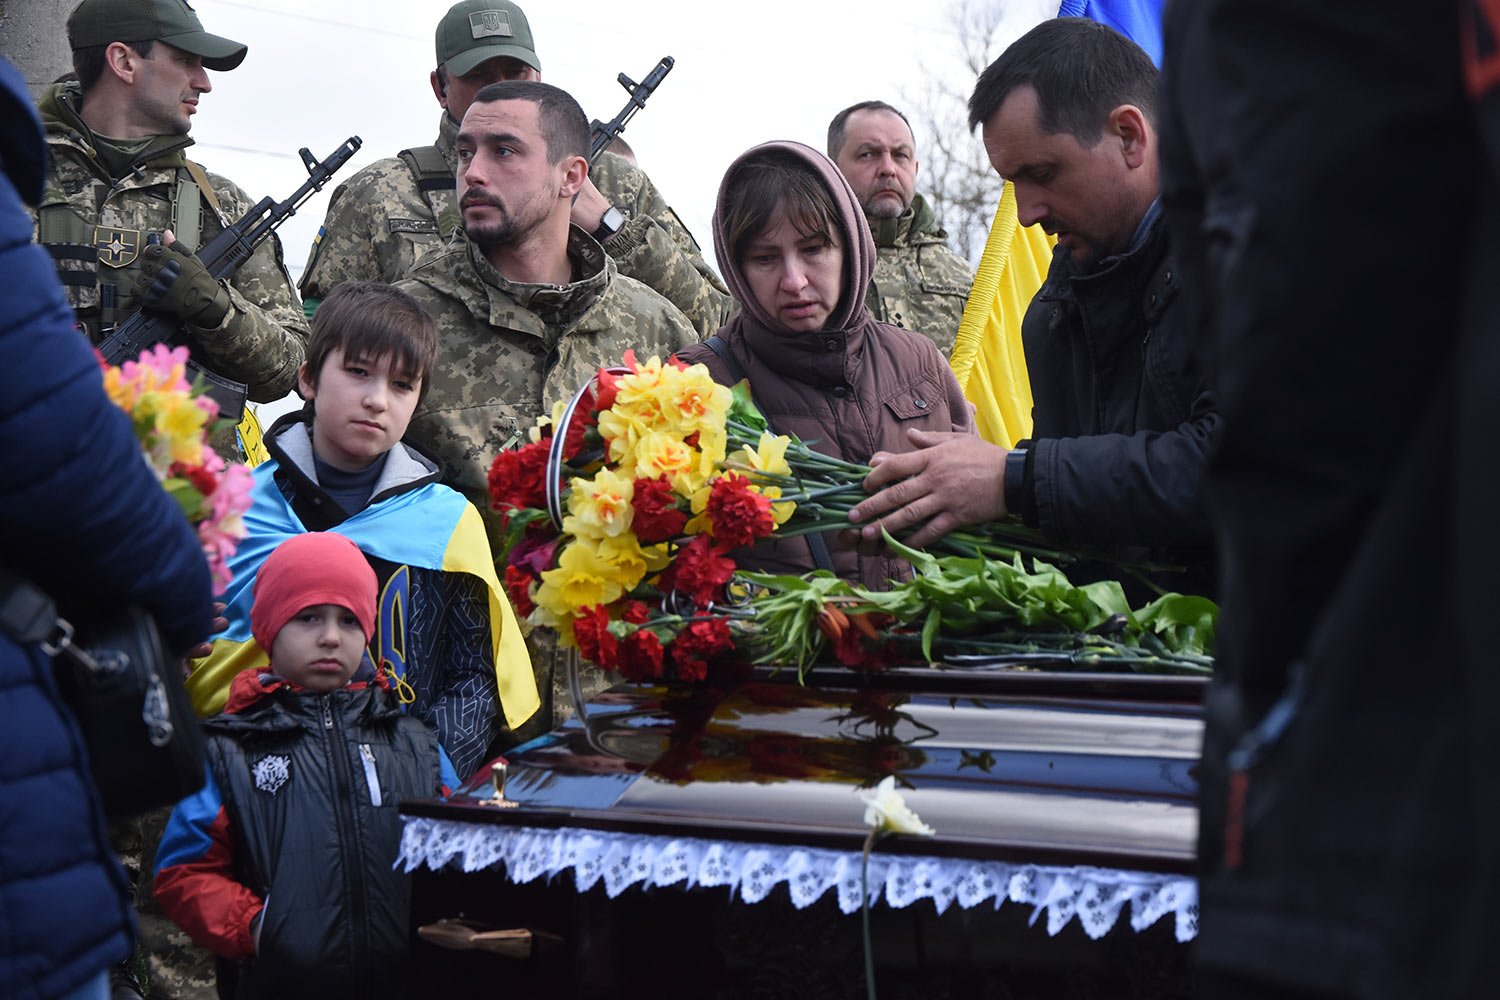  Relatives and friends stand by the coffins of Ukrainian servicemen Yuri Filyuk, 49, and Oleksander Tkachenko, 33, during a funeral ceremony in a village of Oleksandrivka, Odesa region, Ukraine, Tuesday, April 12, 2022. According to Ukrainian service